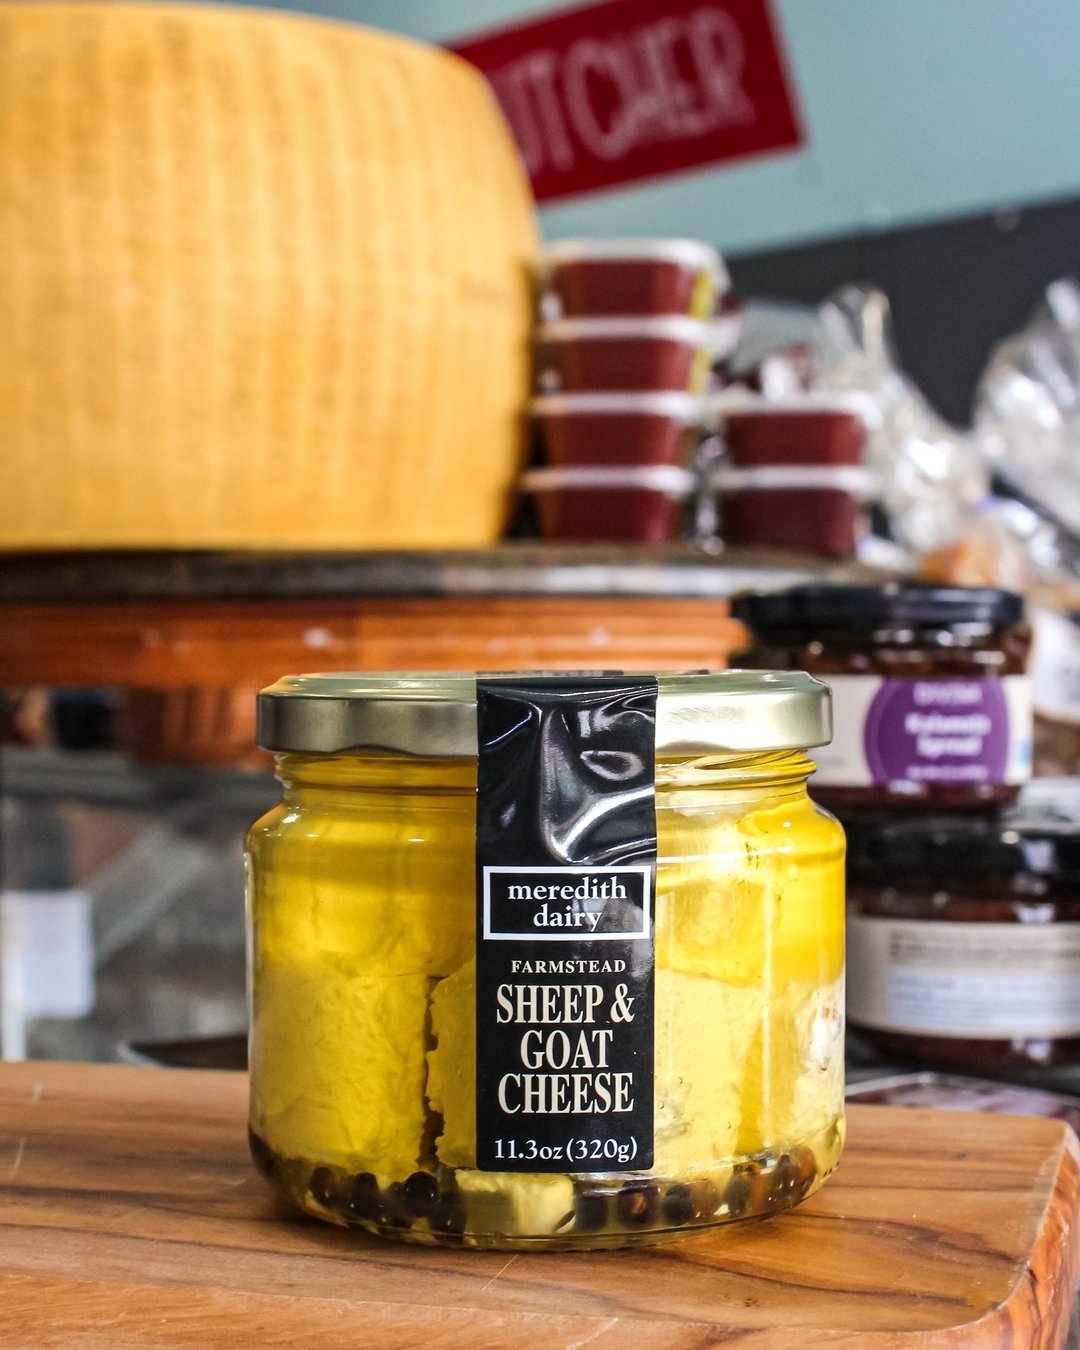 Nico's back with a new cheese for the week! 

This Sheep &amp; Goat cheese belongs on every salad you make for Mom this weekend. Not only does the cheese made a great addition to salads, you can use the oil to dress it too. 

#cheeseplease